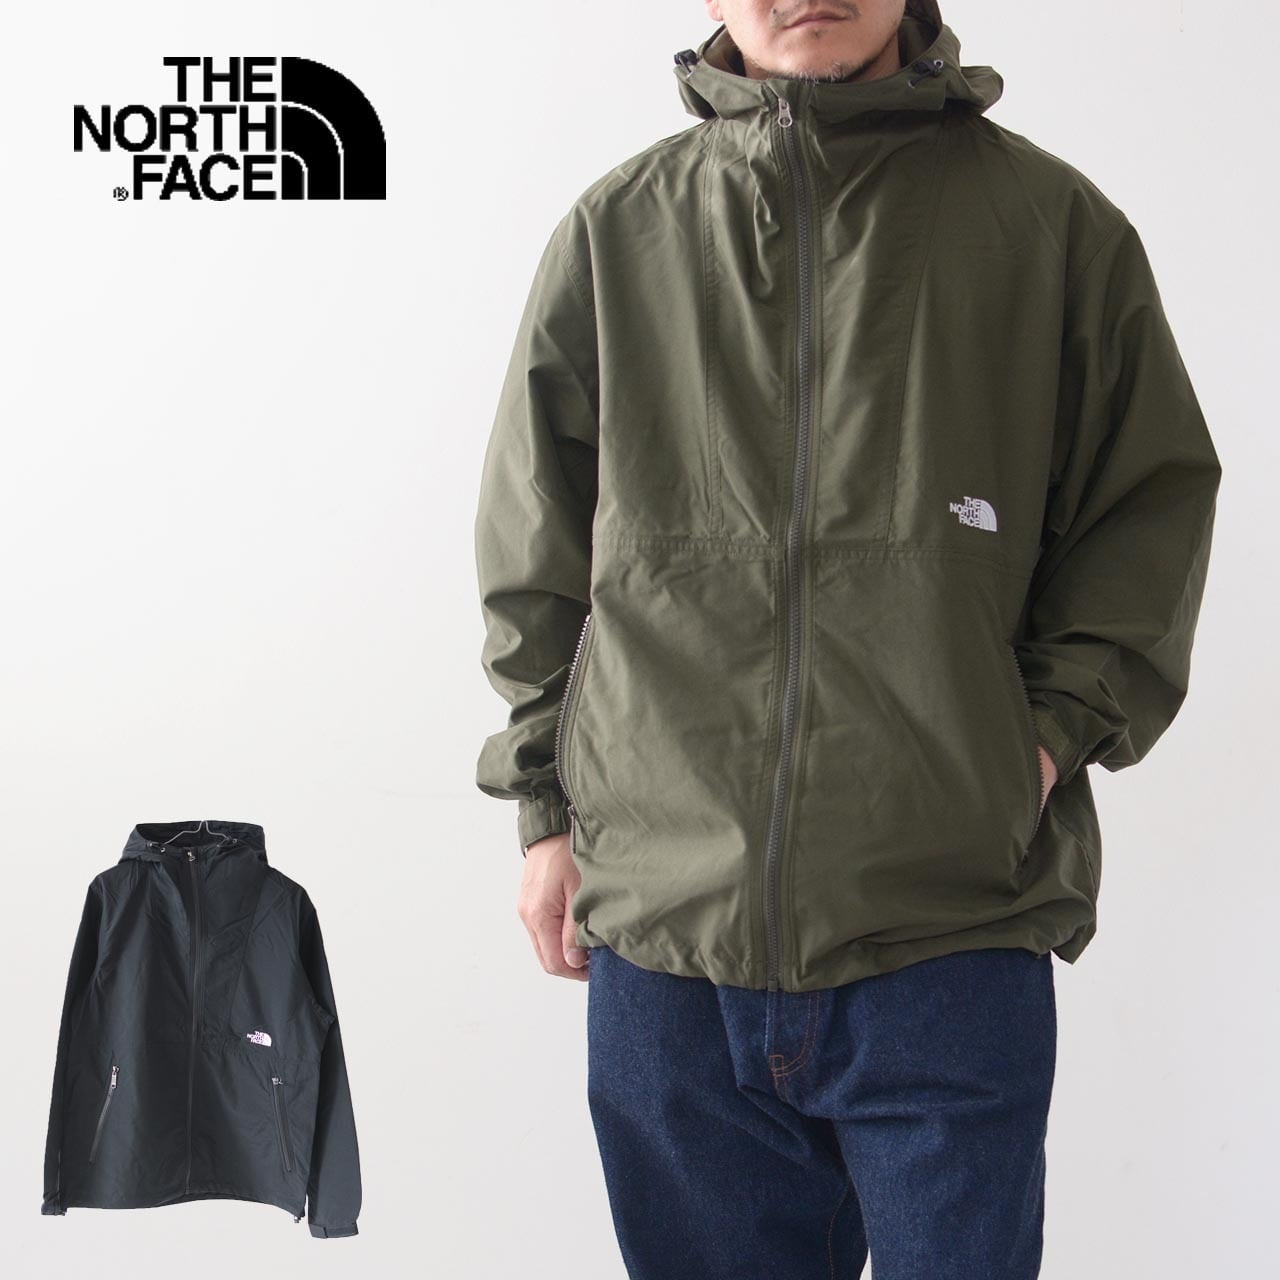 THE NORTH FACE コンパクトジャケット NP72230